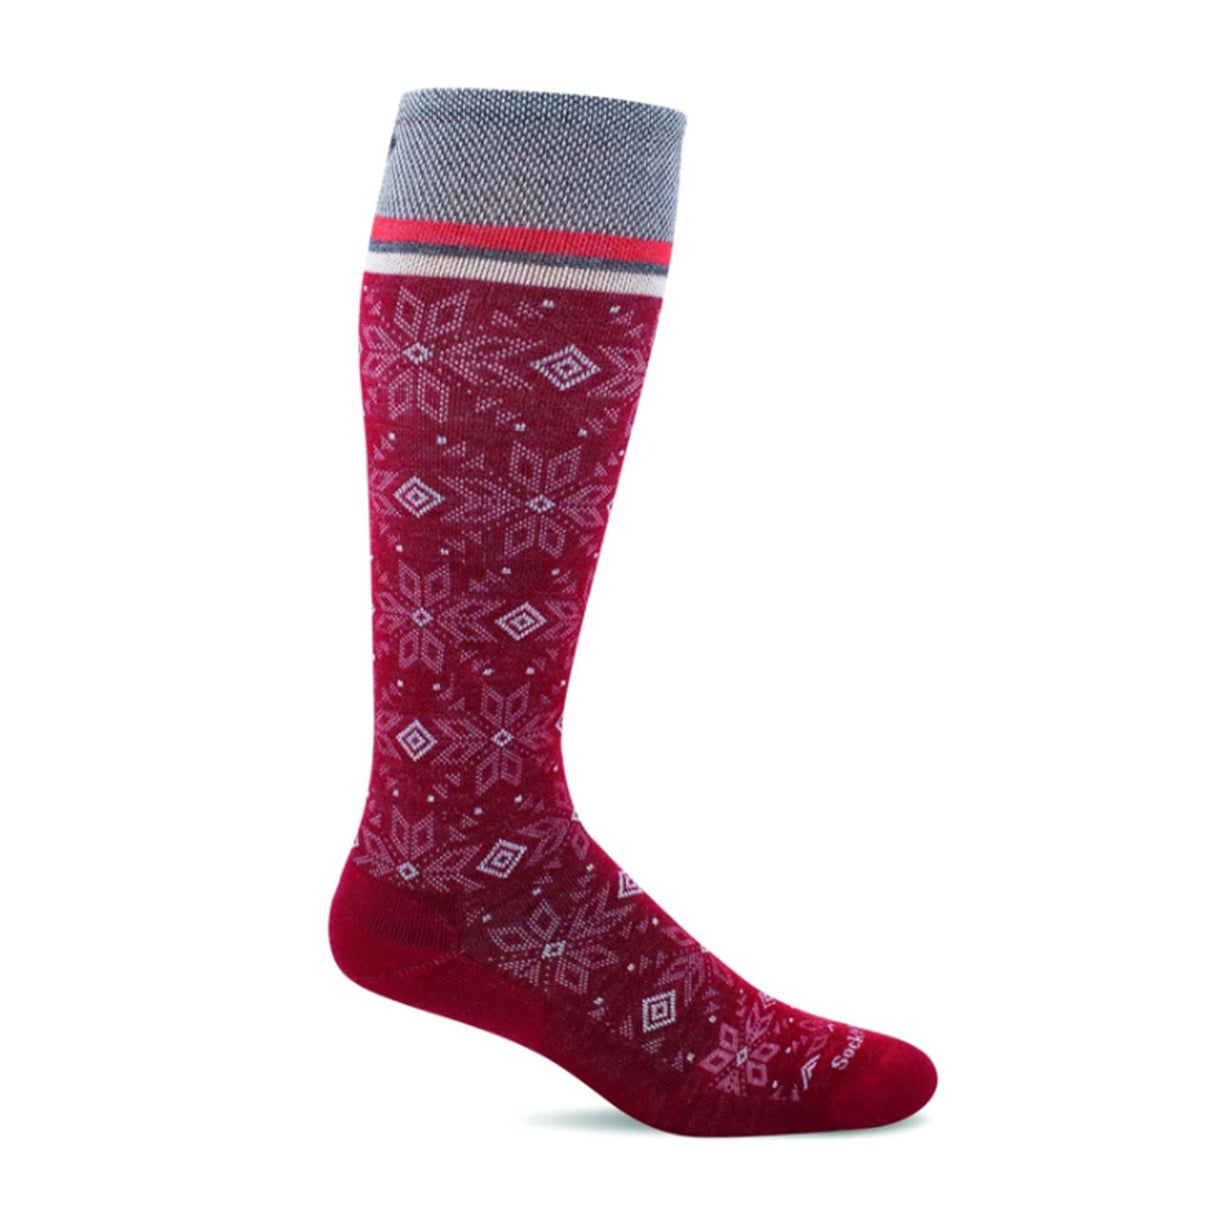 Sockwell Winterland Over the Calf Compression Sock (Women) - Ruby Accessories - Socks - Compression - The Heel Shoe Fitters